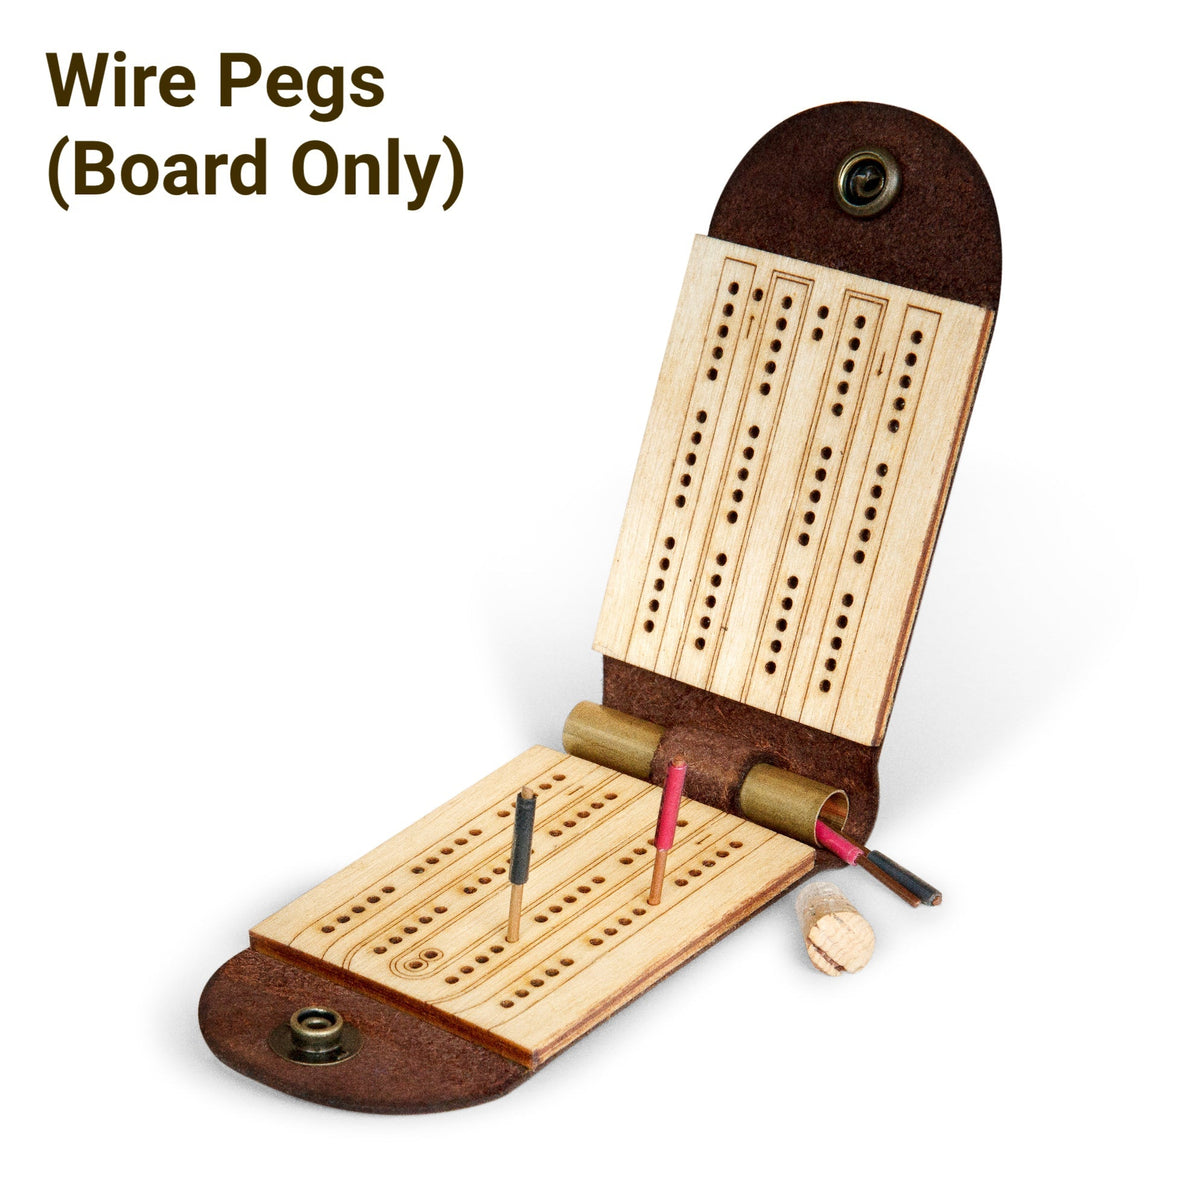 Folding leather travel cribbage board, open and unhinged, showing copper wire metal pegs in red and black finishes in peg holes, The pegs are made from electrical wire available at hardware stores. There is also an uncorked brass storage tube.